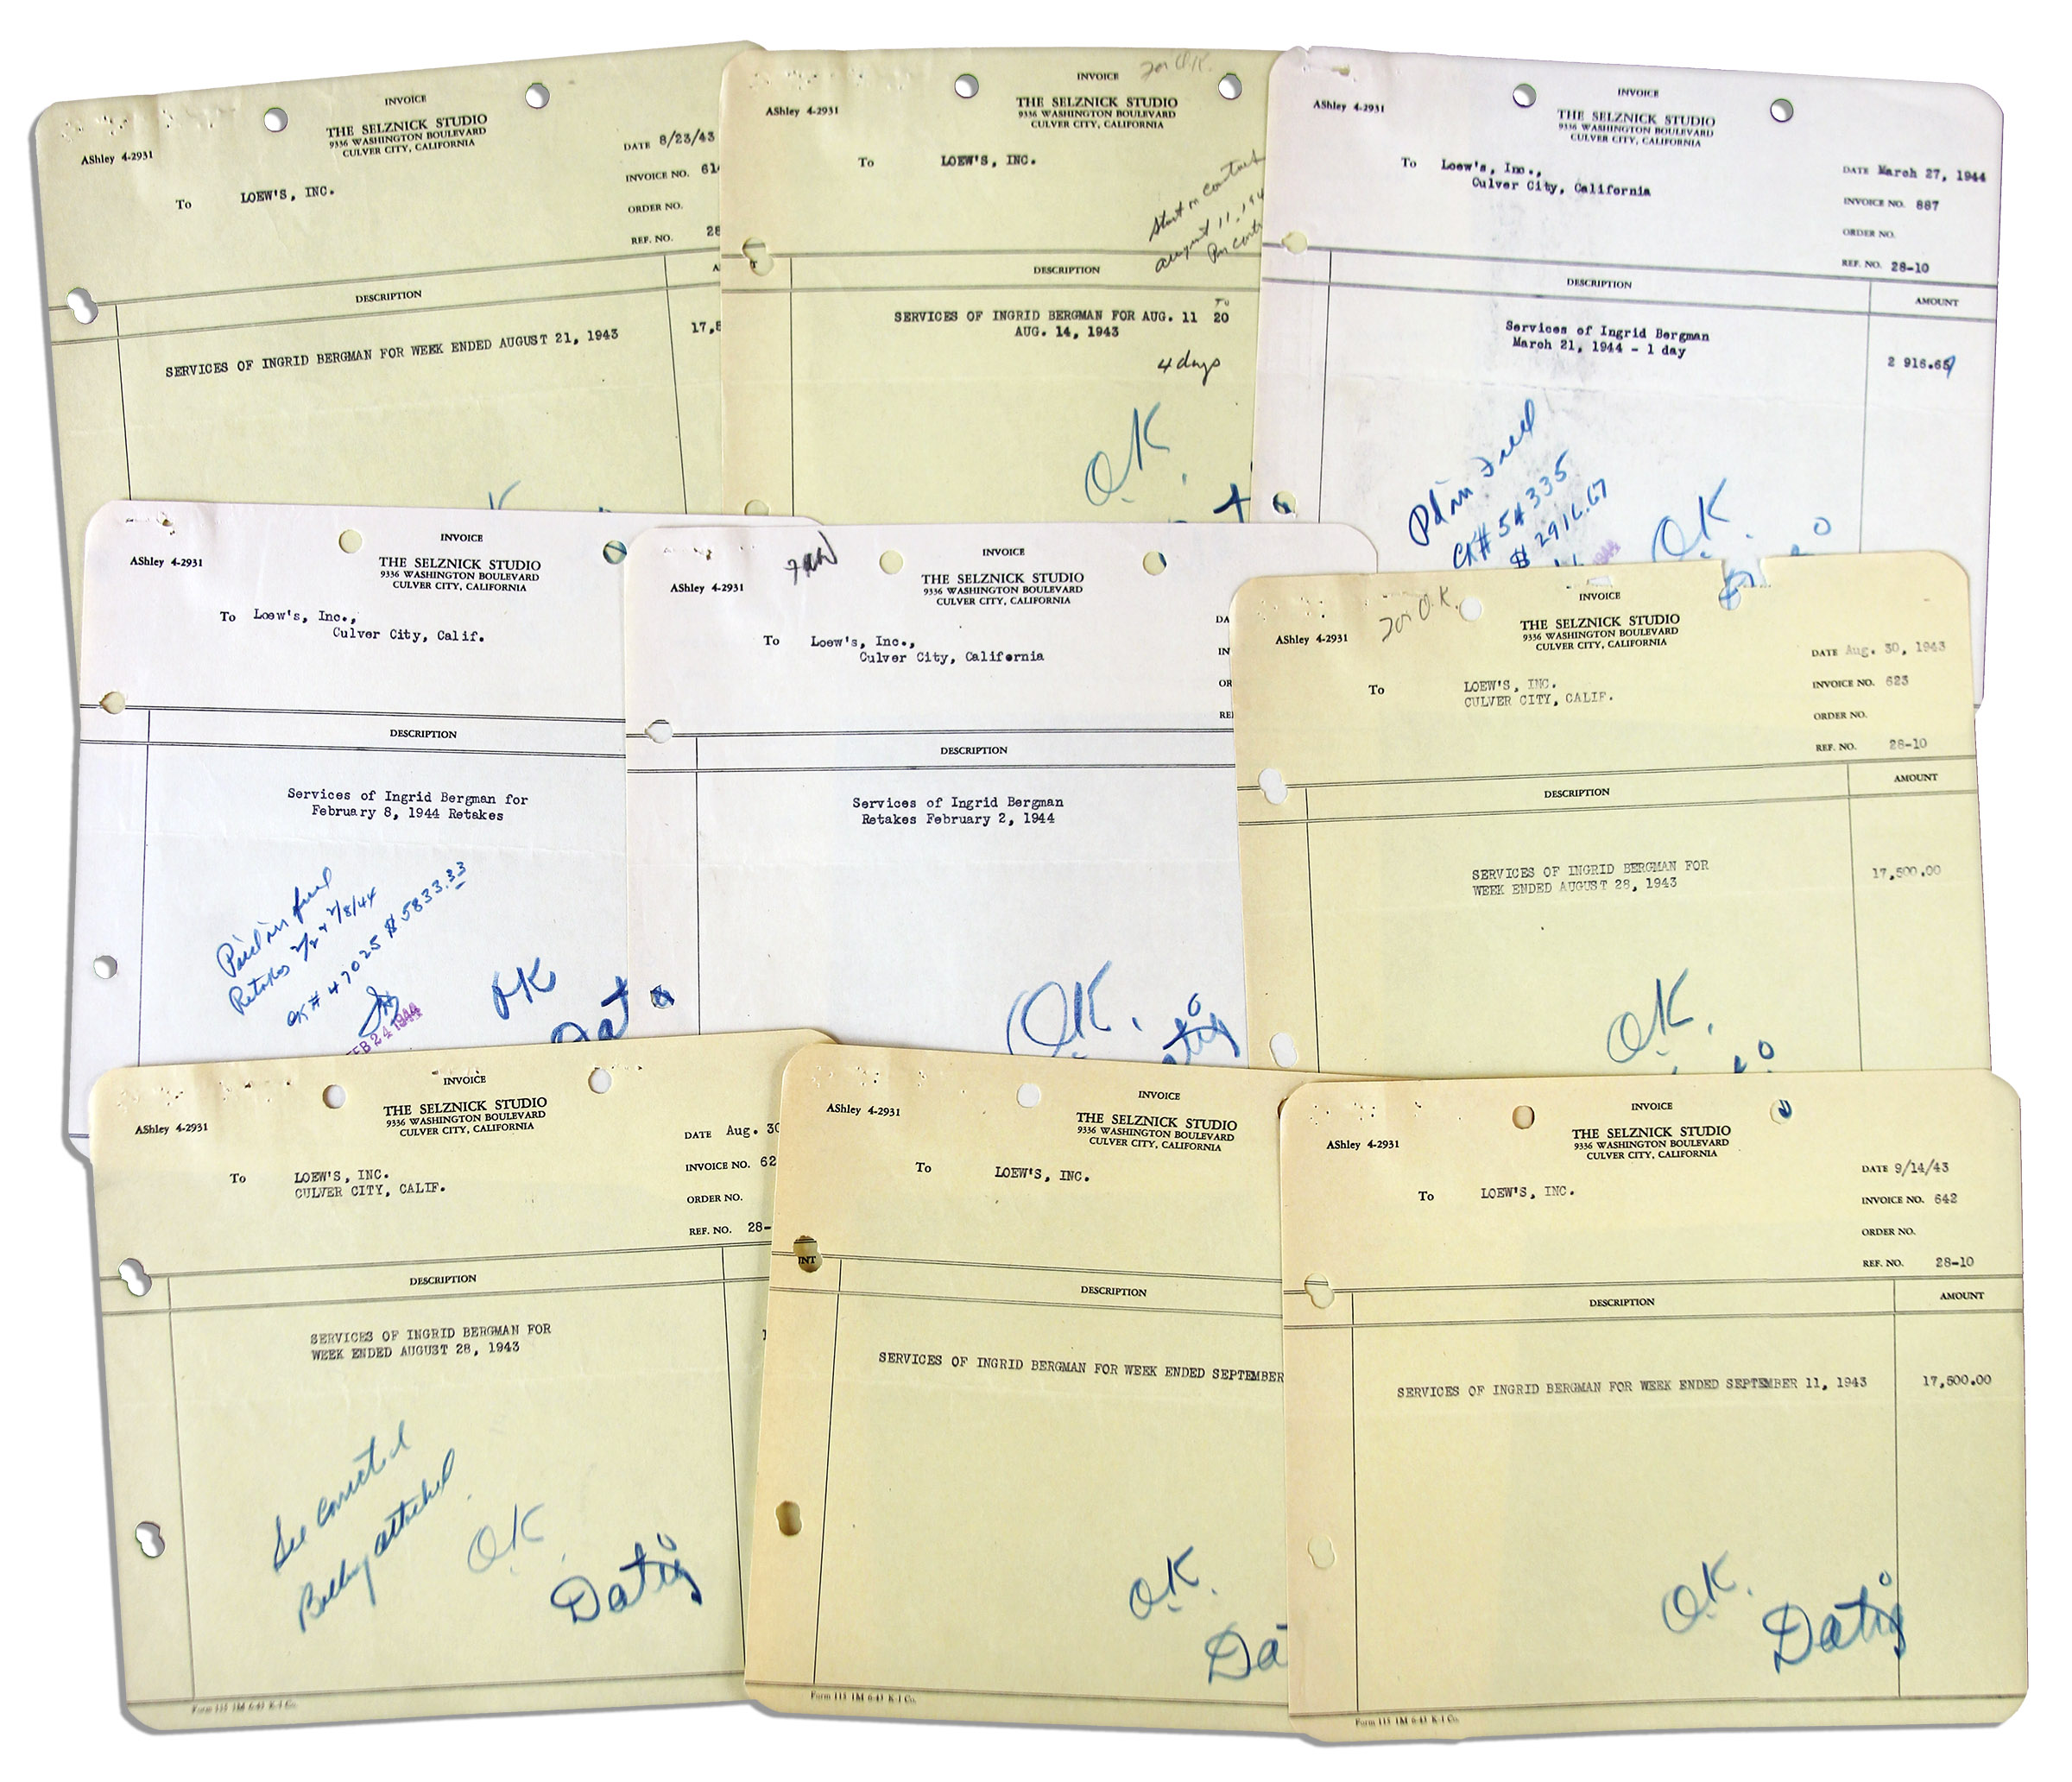 Collection of 9 invoices detailing payment to Ingrid Bergman from The Selznick Studio, dated 1943-